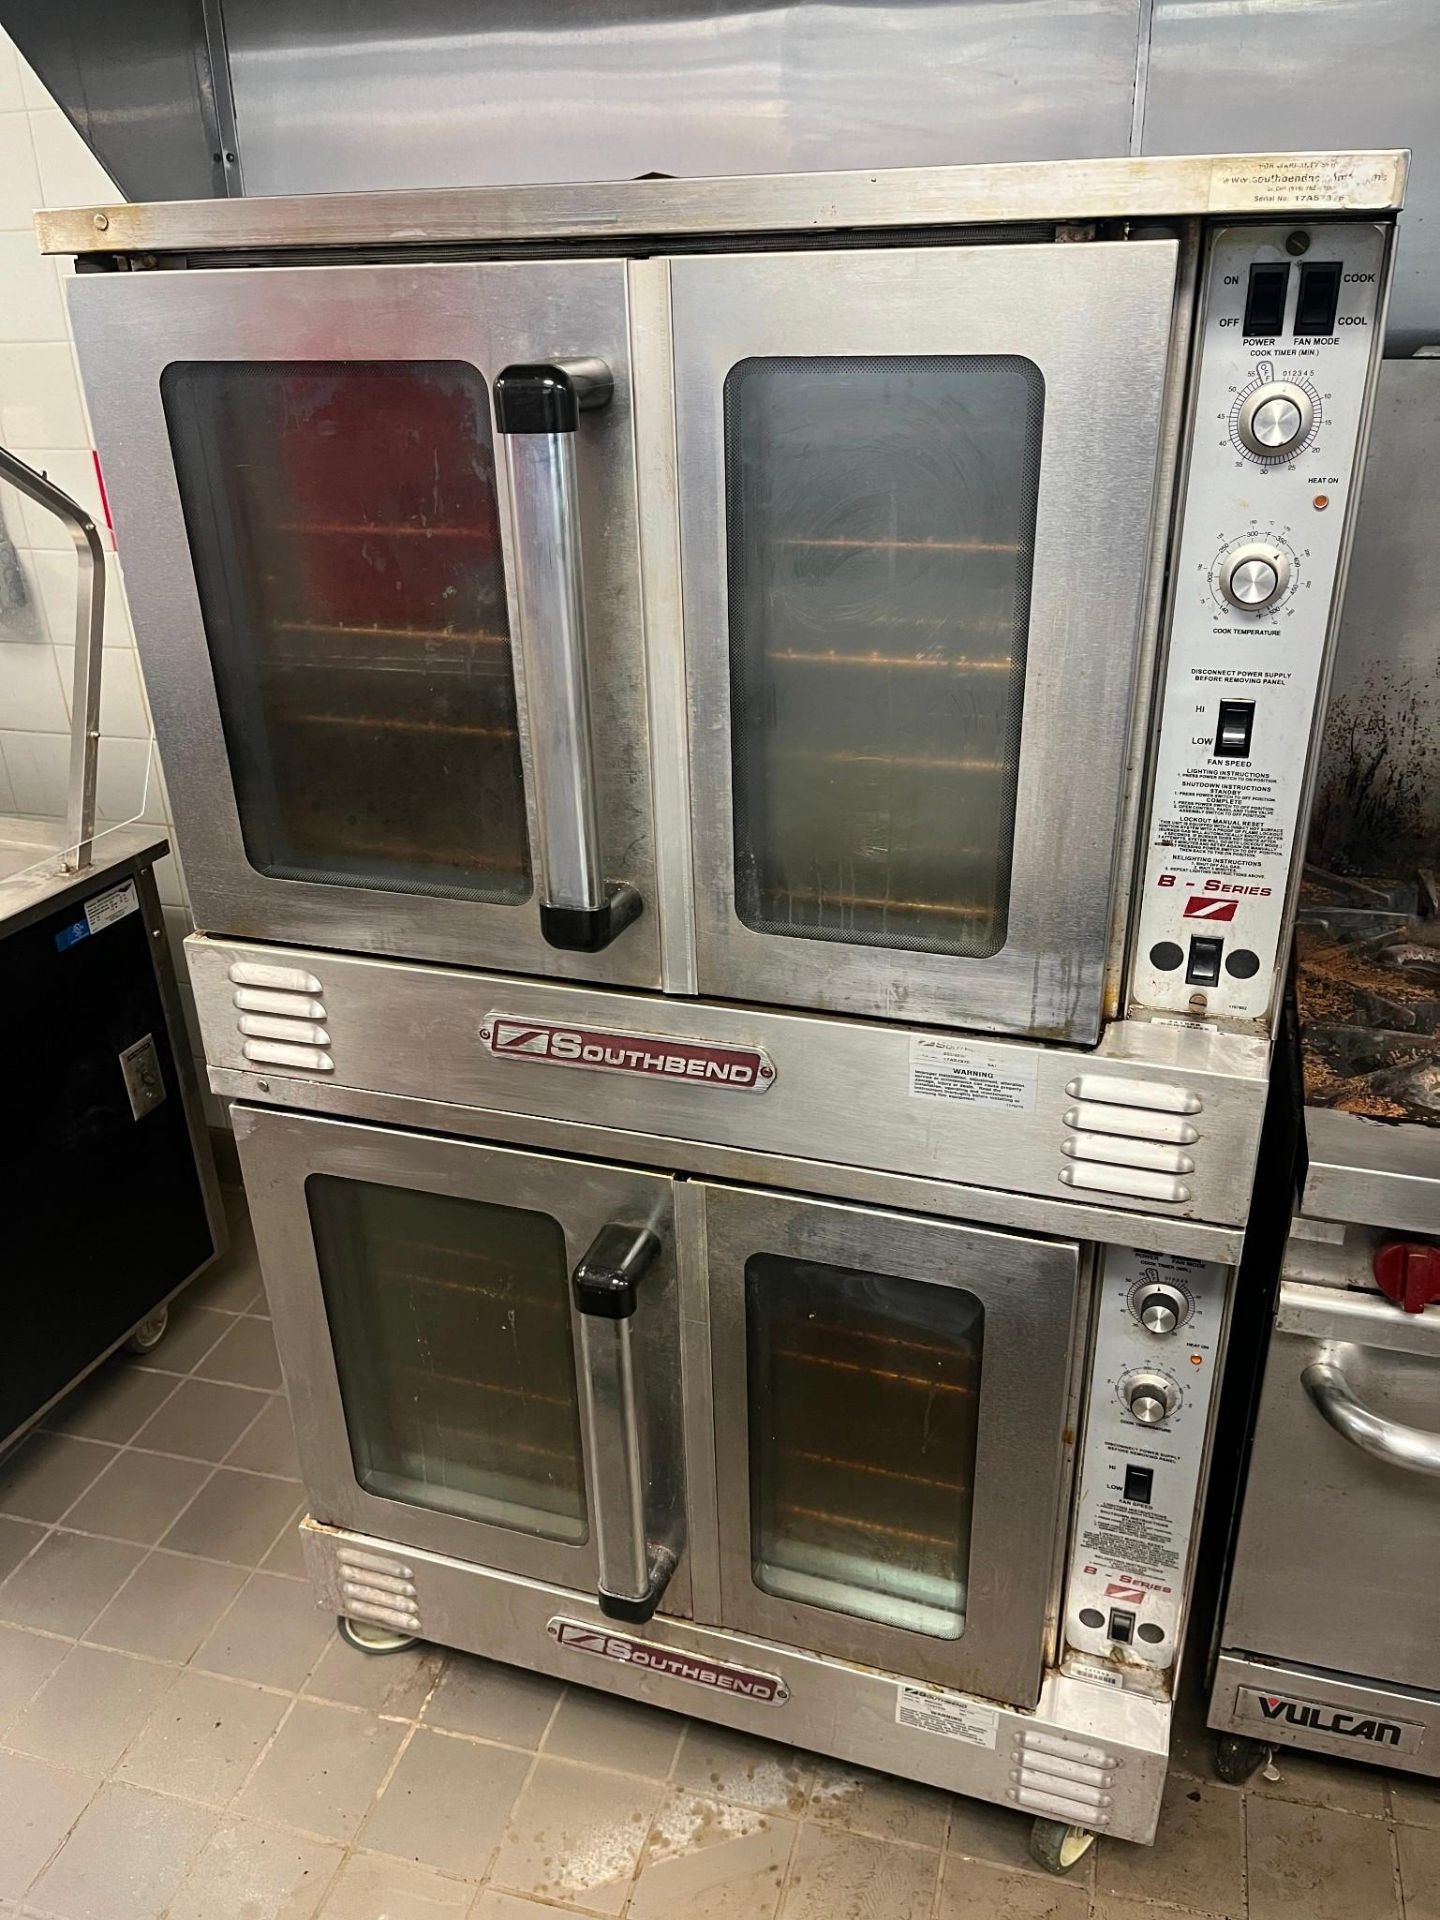 SOUTH BEND- CONVECTION OVENS, DOUBLE STACK